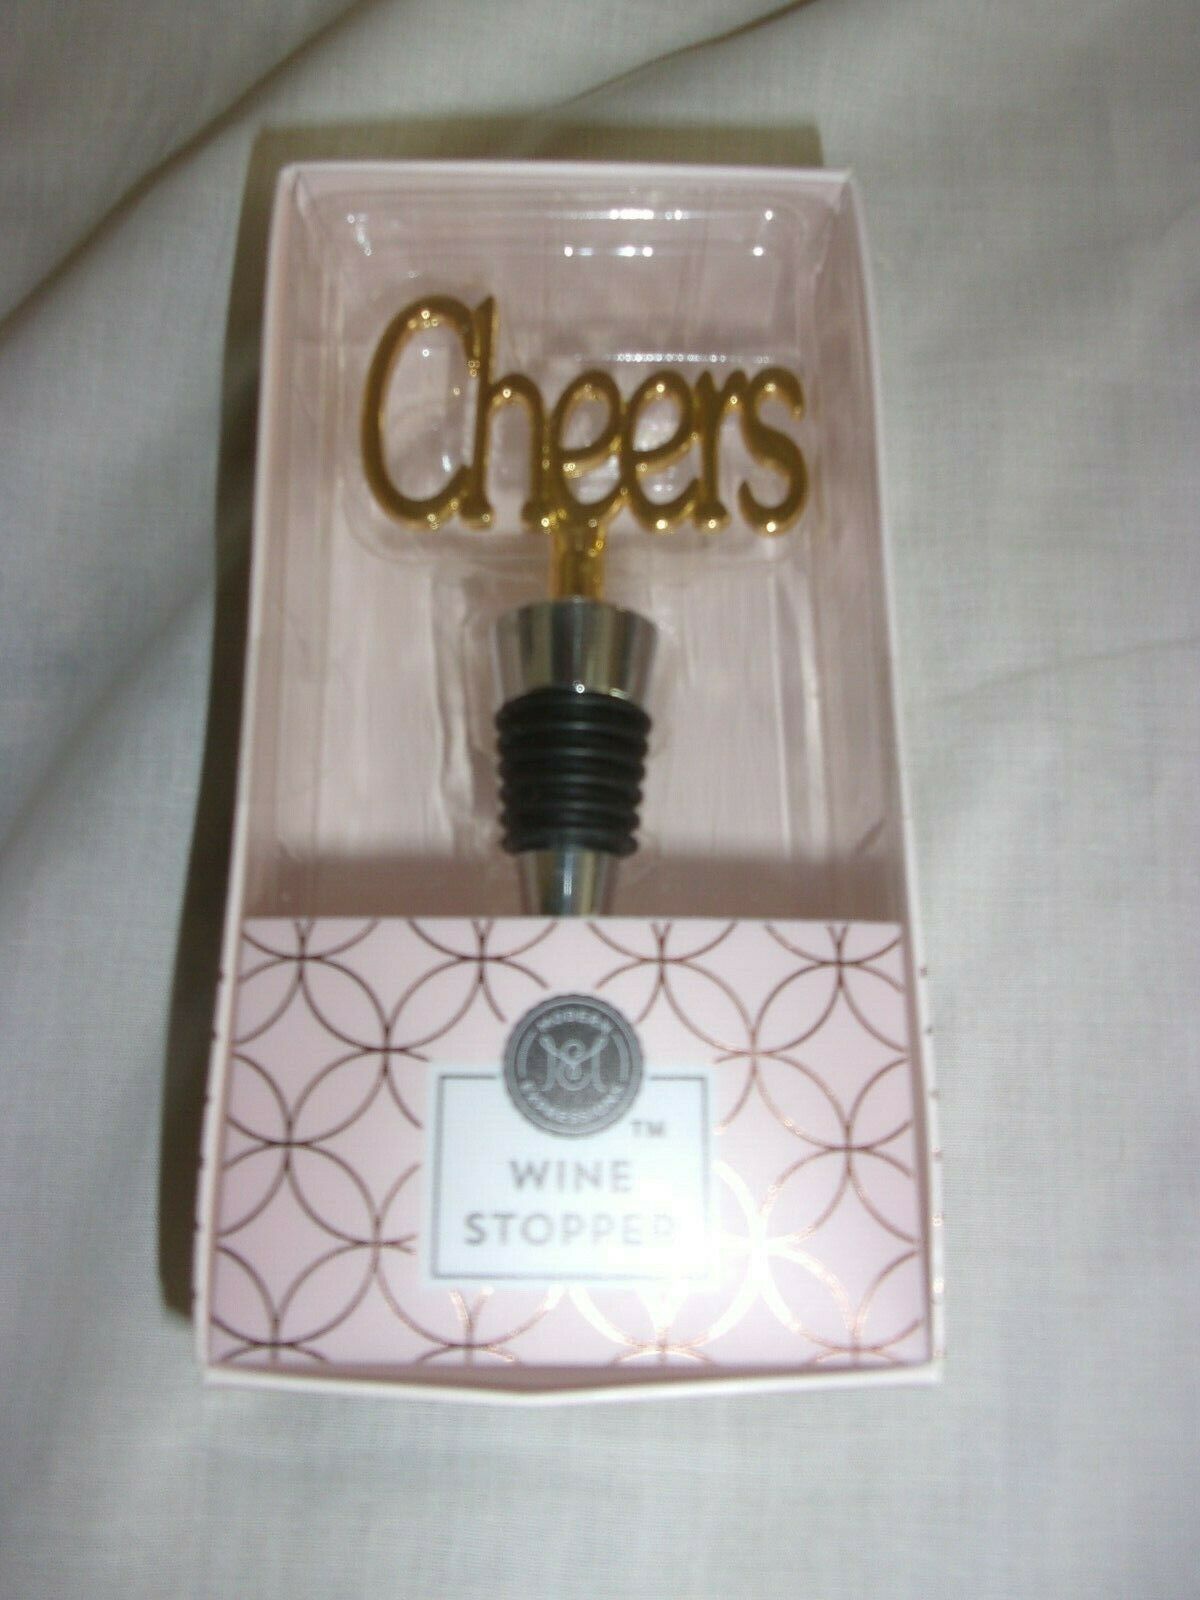 "Cheers" Metal Wine Stopper By Modern Expressions New Sealed - $8.99